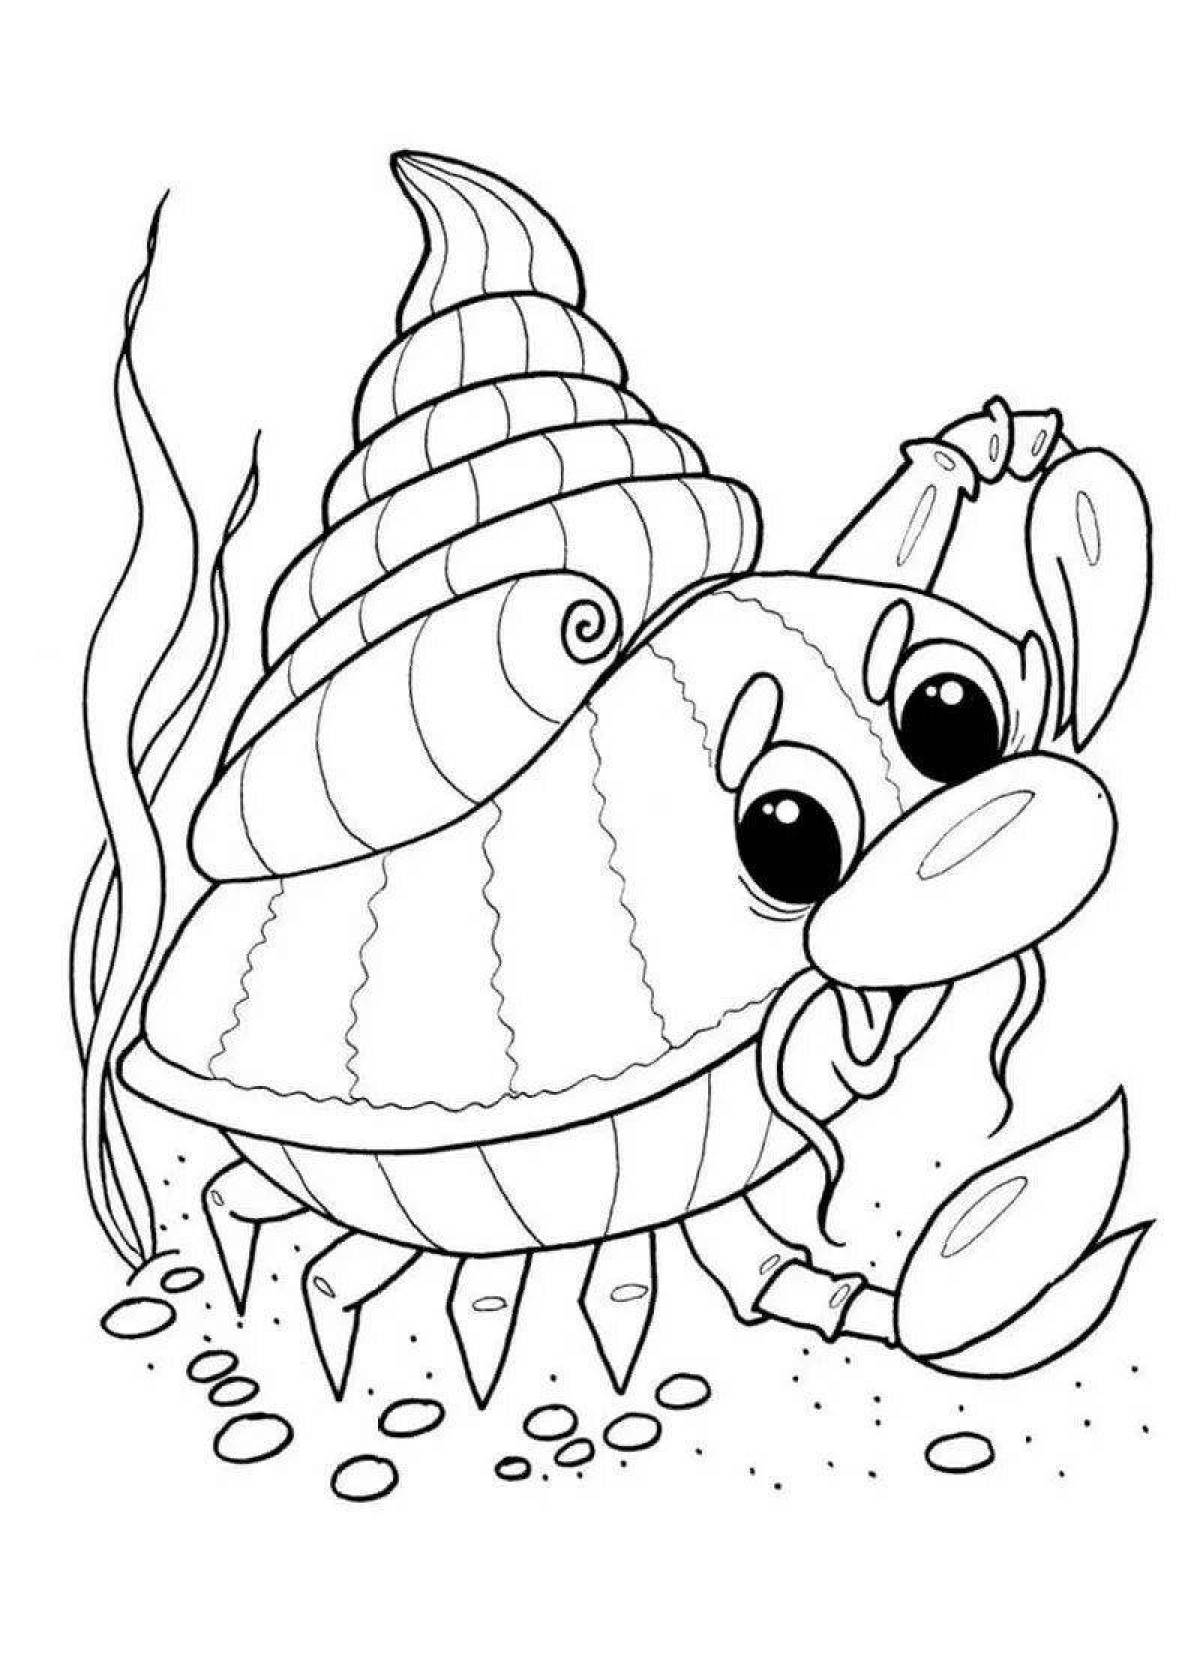 Fun marine life coloring page for 4-5 year olds